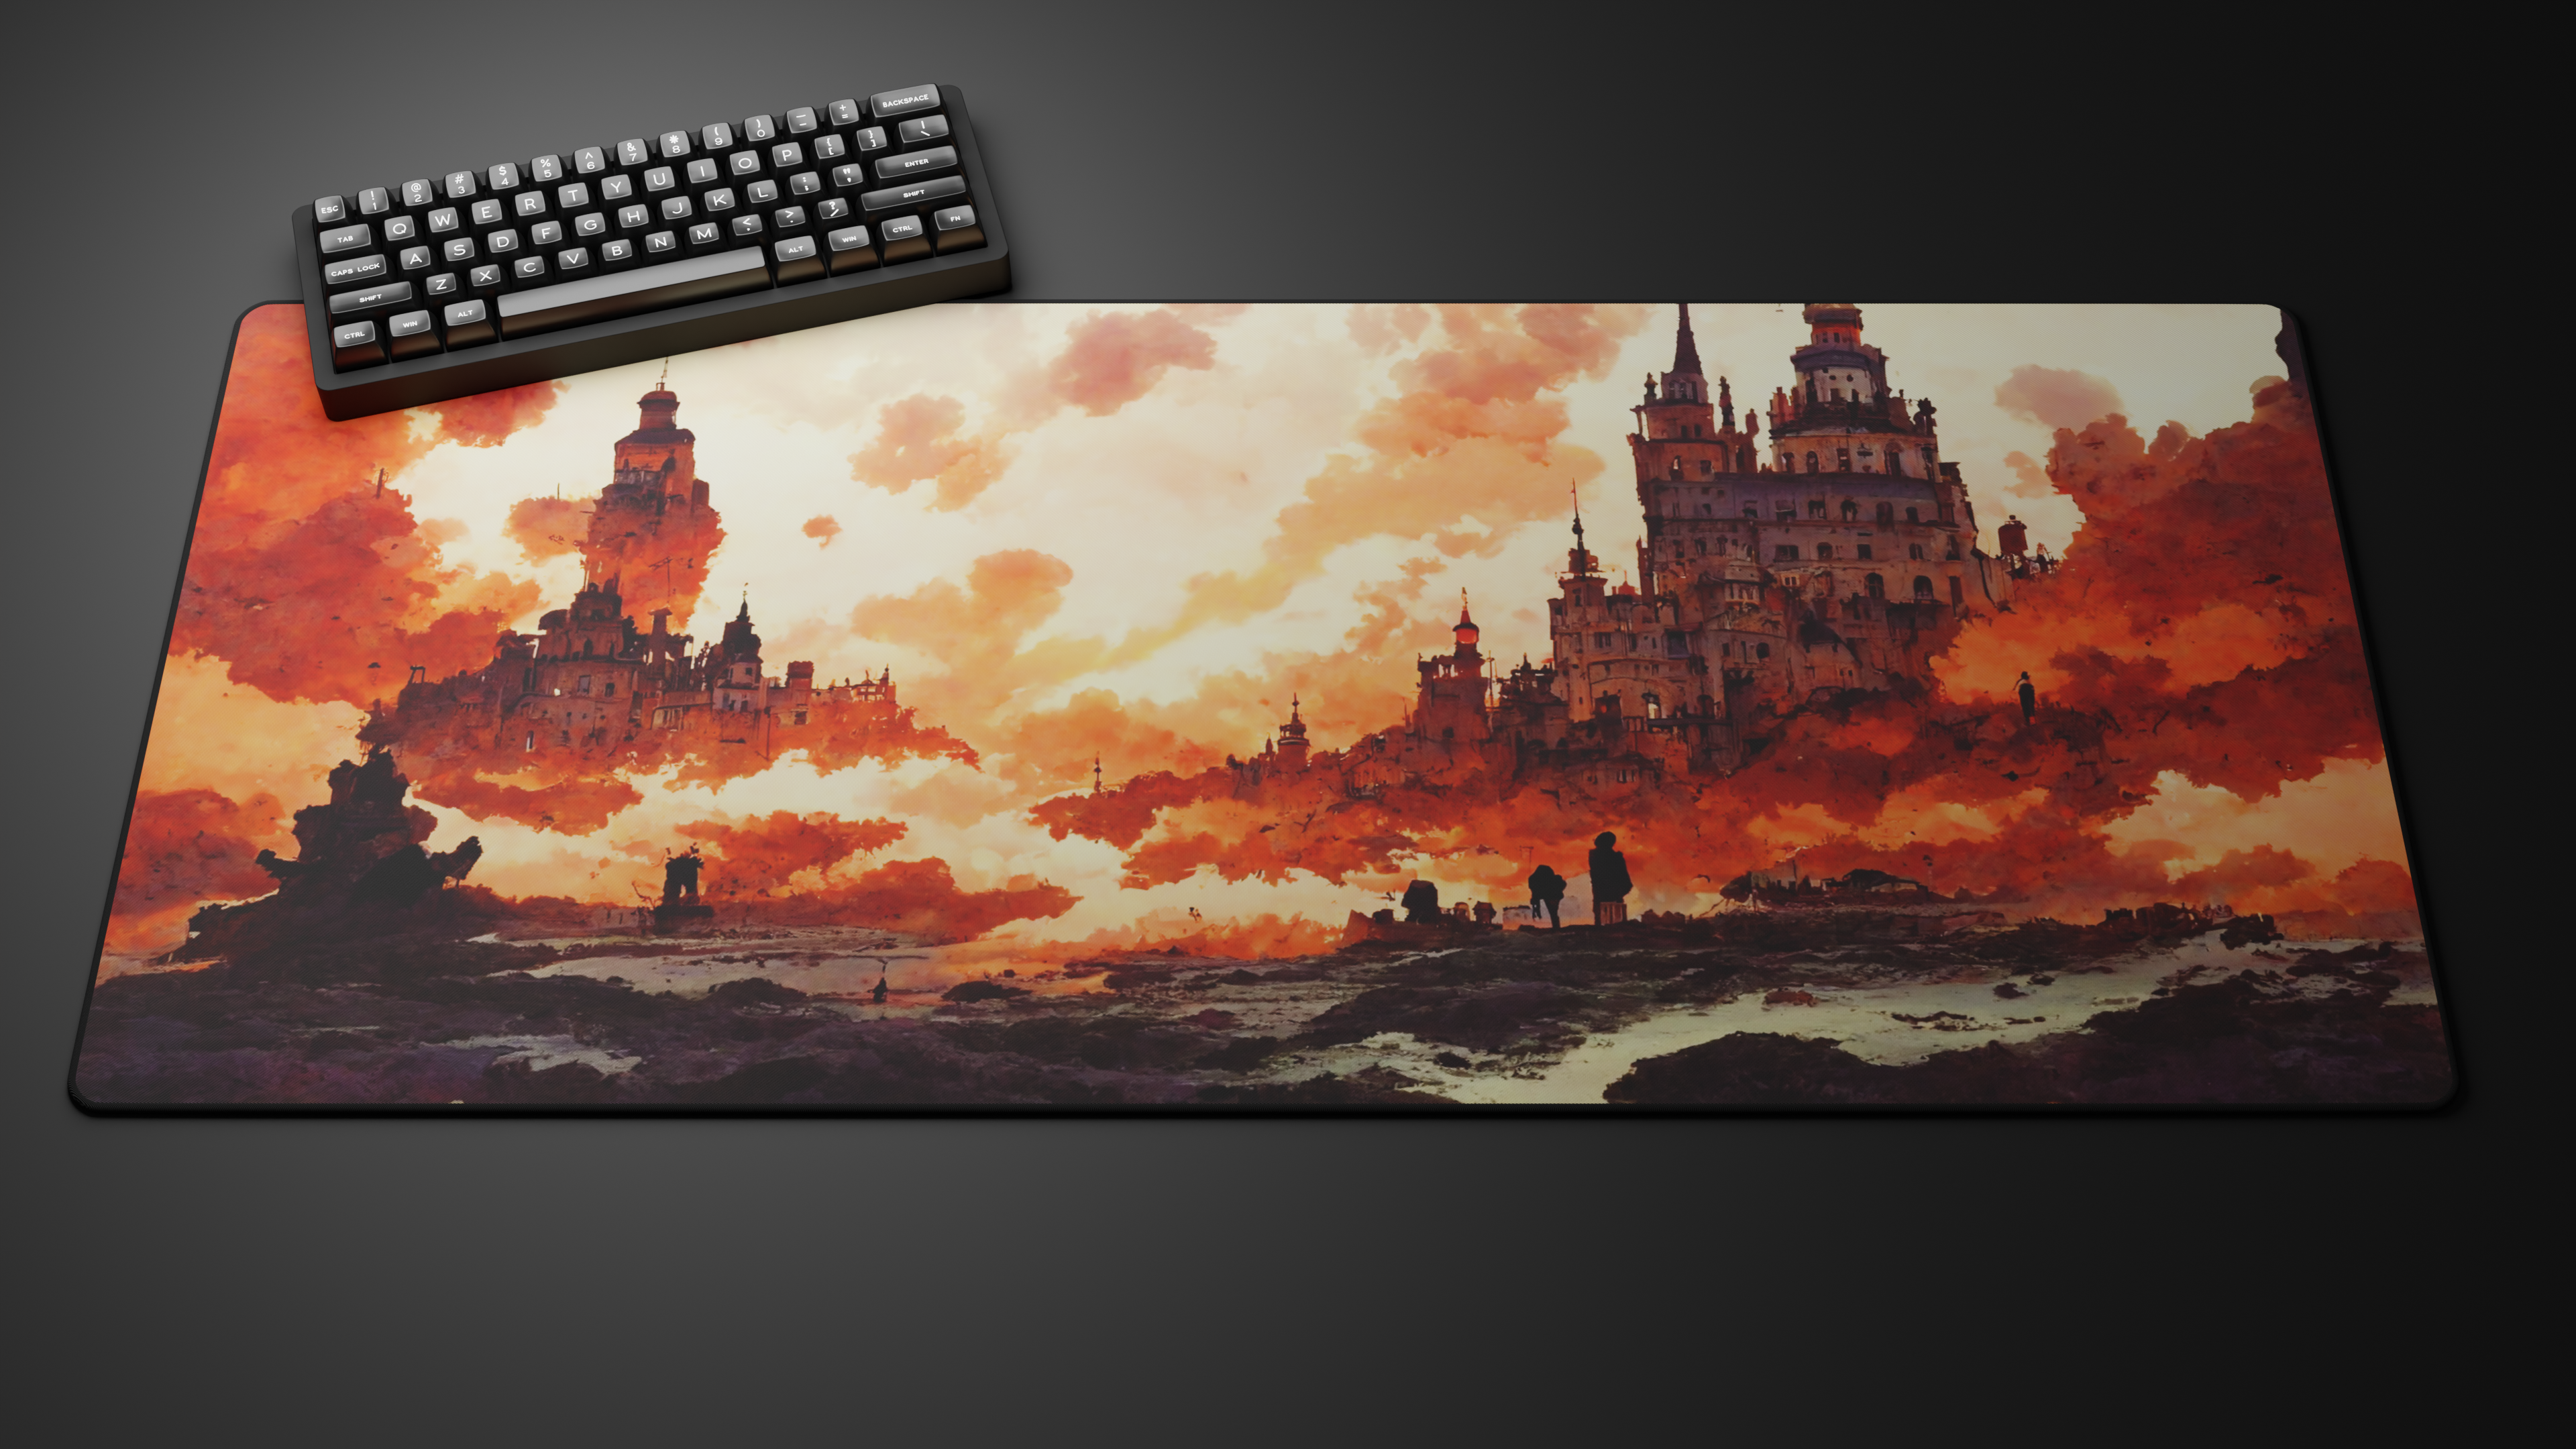 Deskmat 'AI Collection - Burning Empire' by glutch